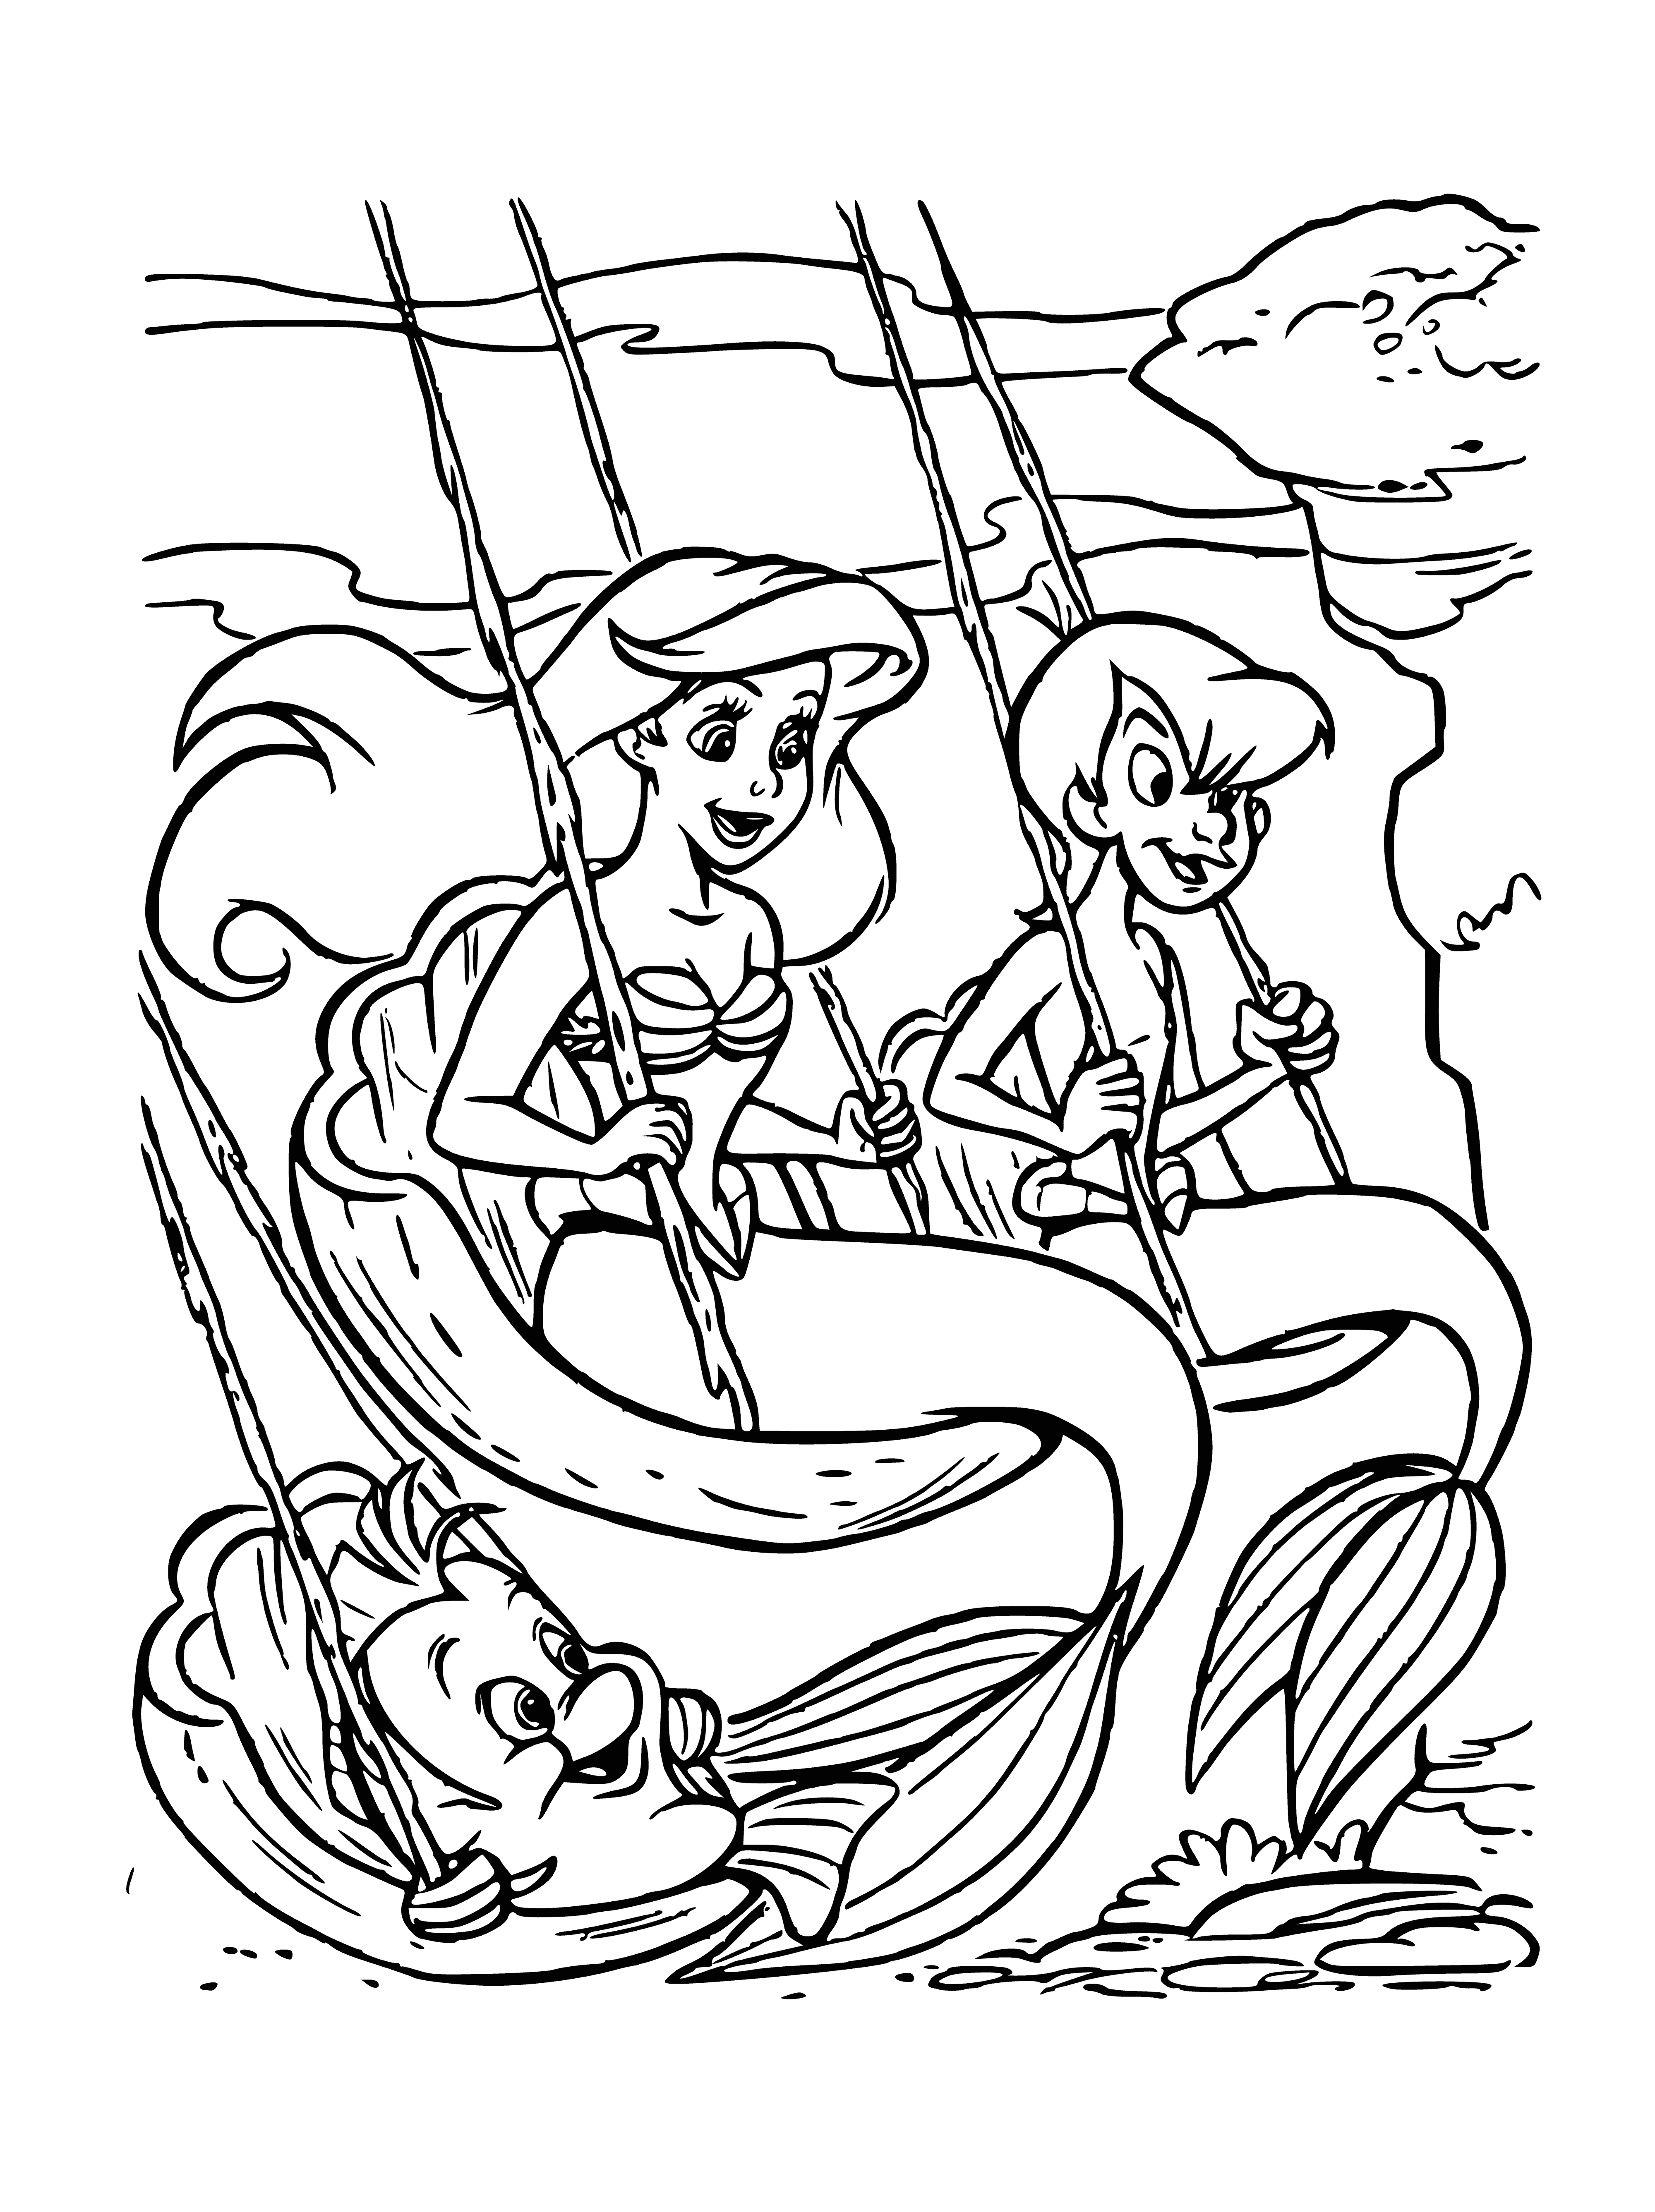 coloring page: Mermaid smiles with red hair, billows in the water; a small blue fish joins her for a starfish viewing. #underthesea